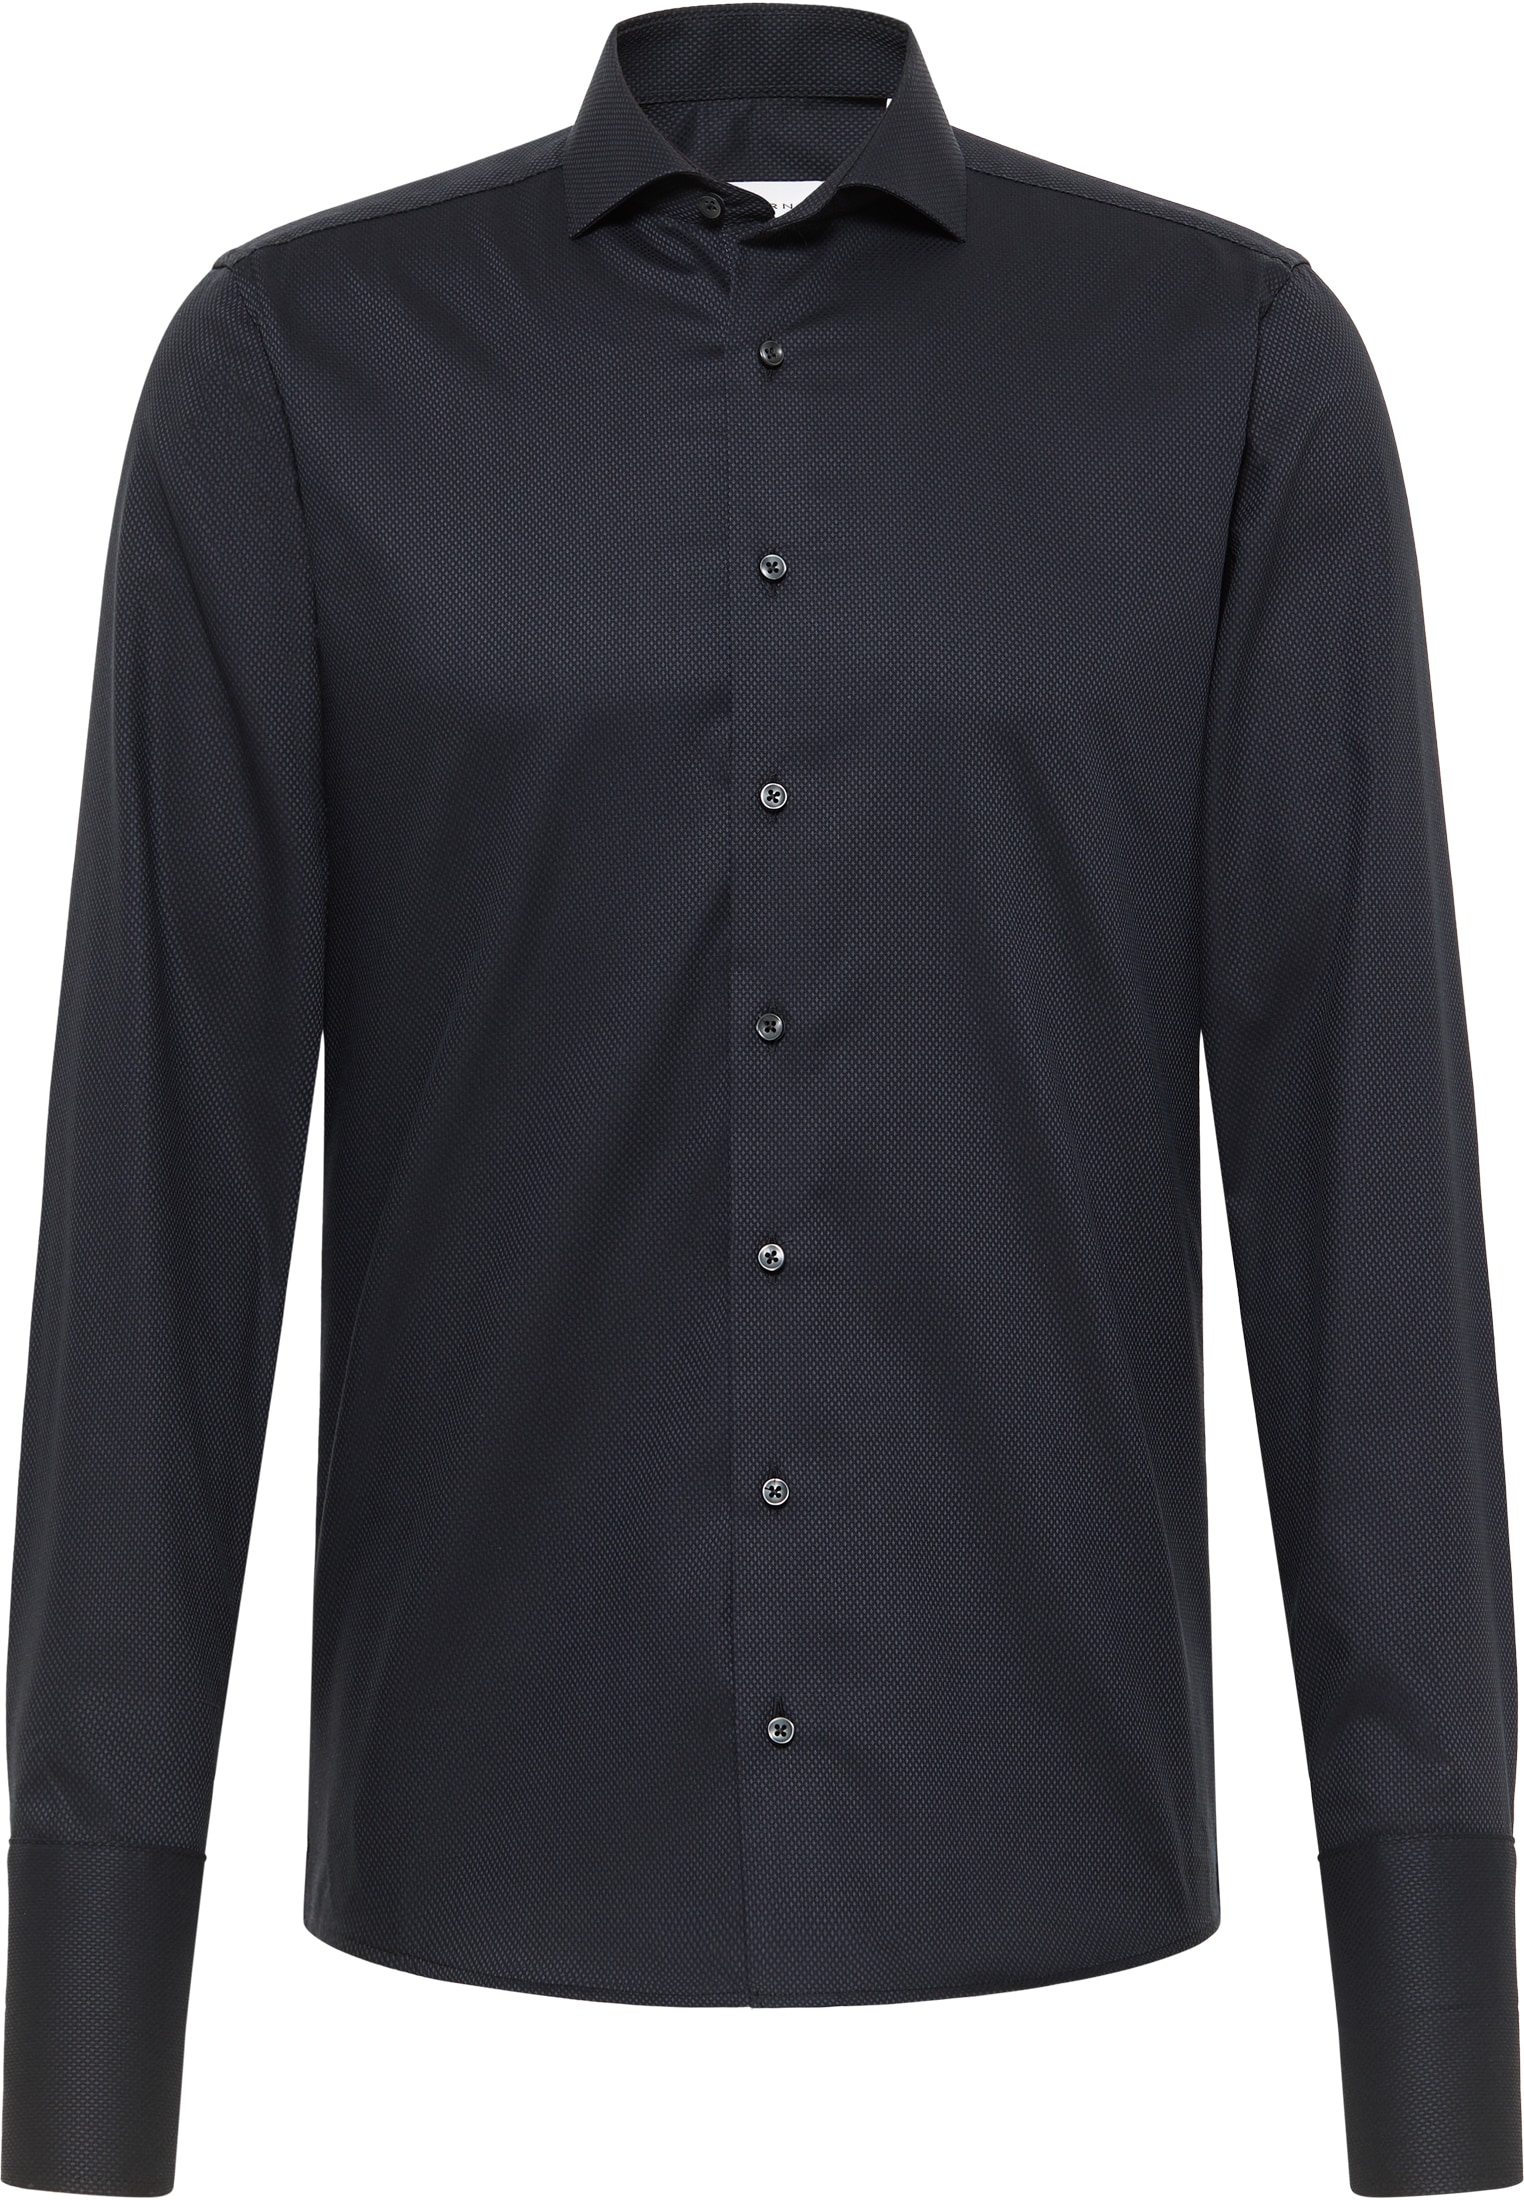 SLIM FIT Shirt in graphite structured